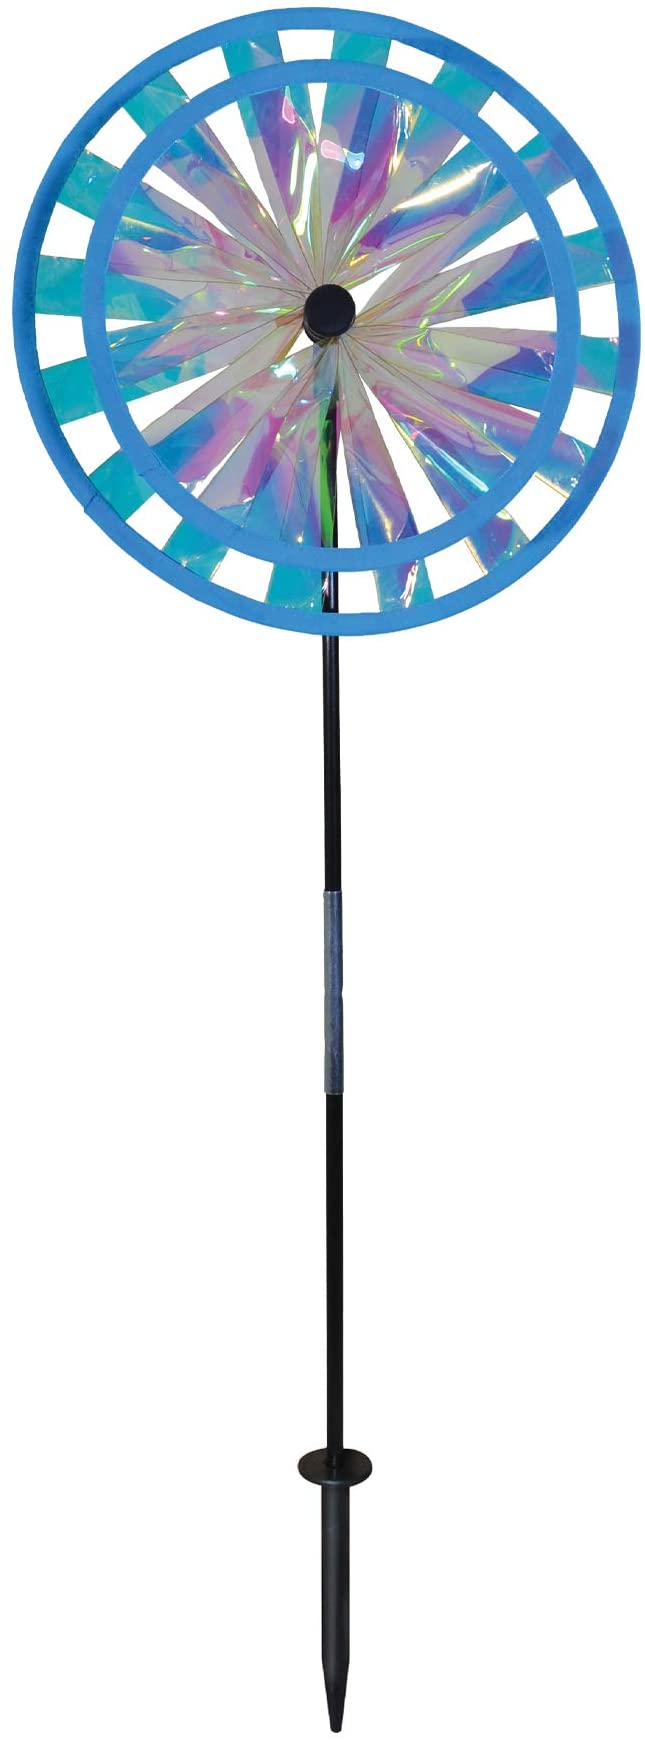 In the Breeze 2687 13 Inch Sparkle Wind Colorful Spinner for Your Yard and Garden, 13" Double Wheel-Iridescent